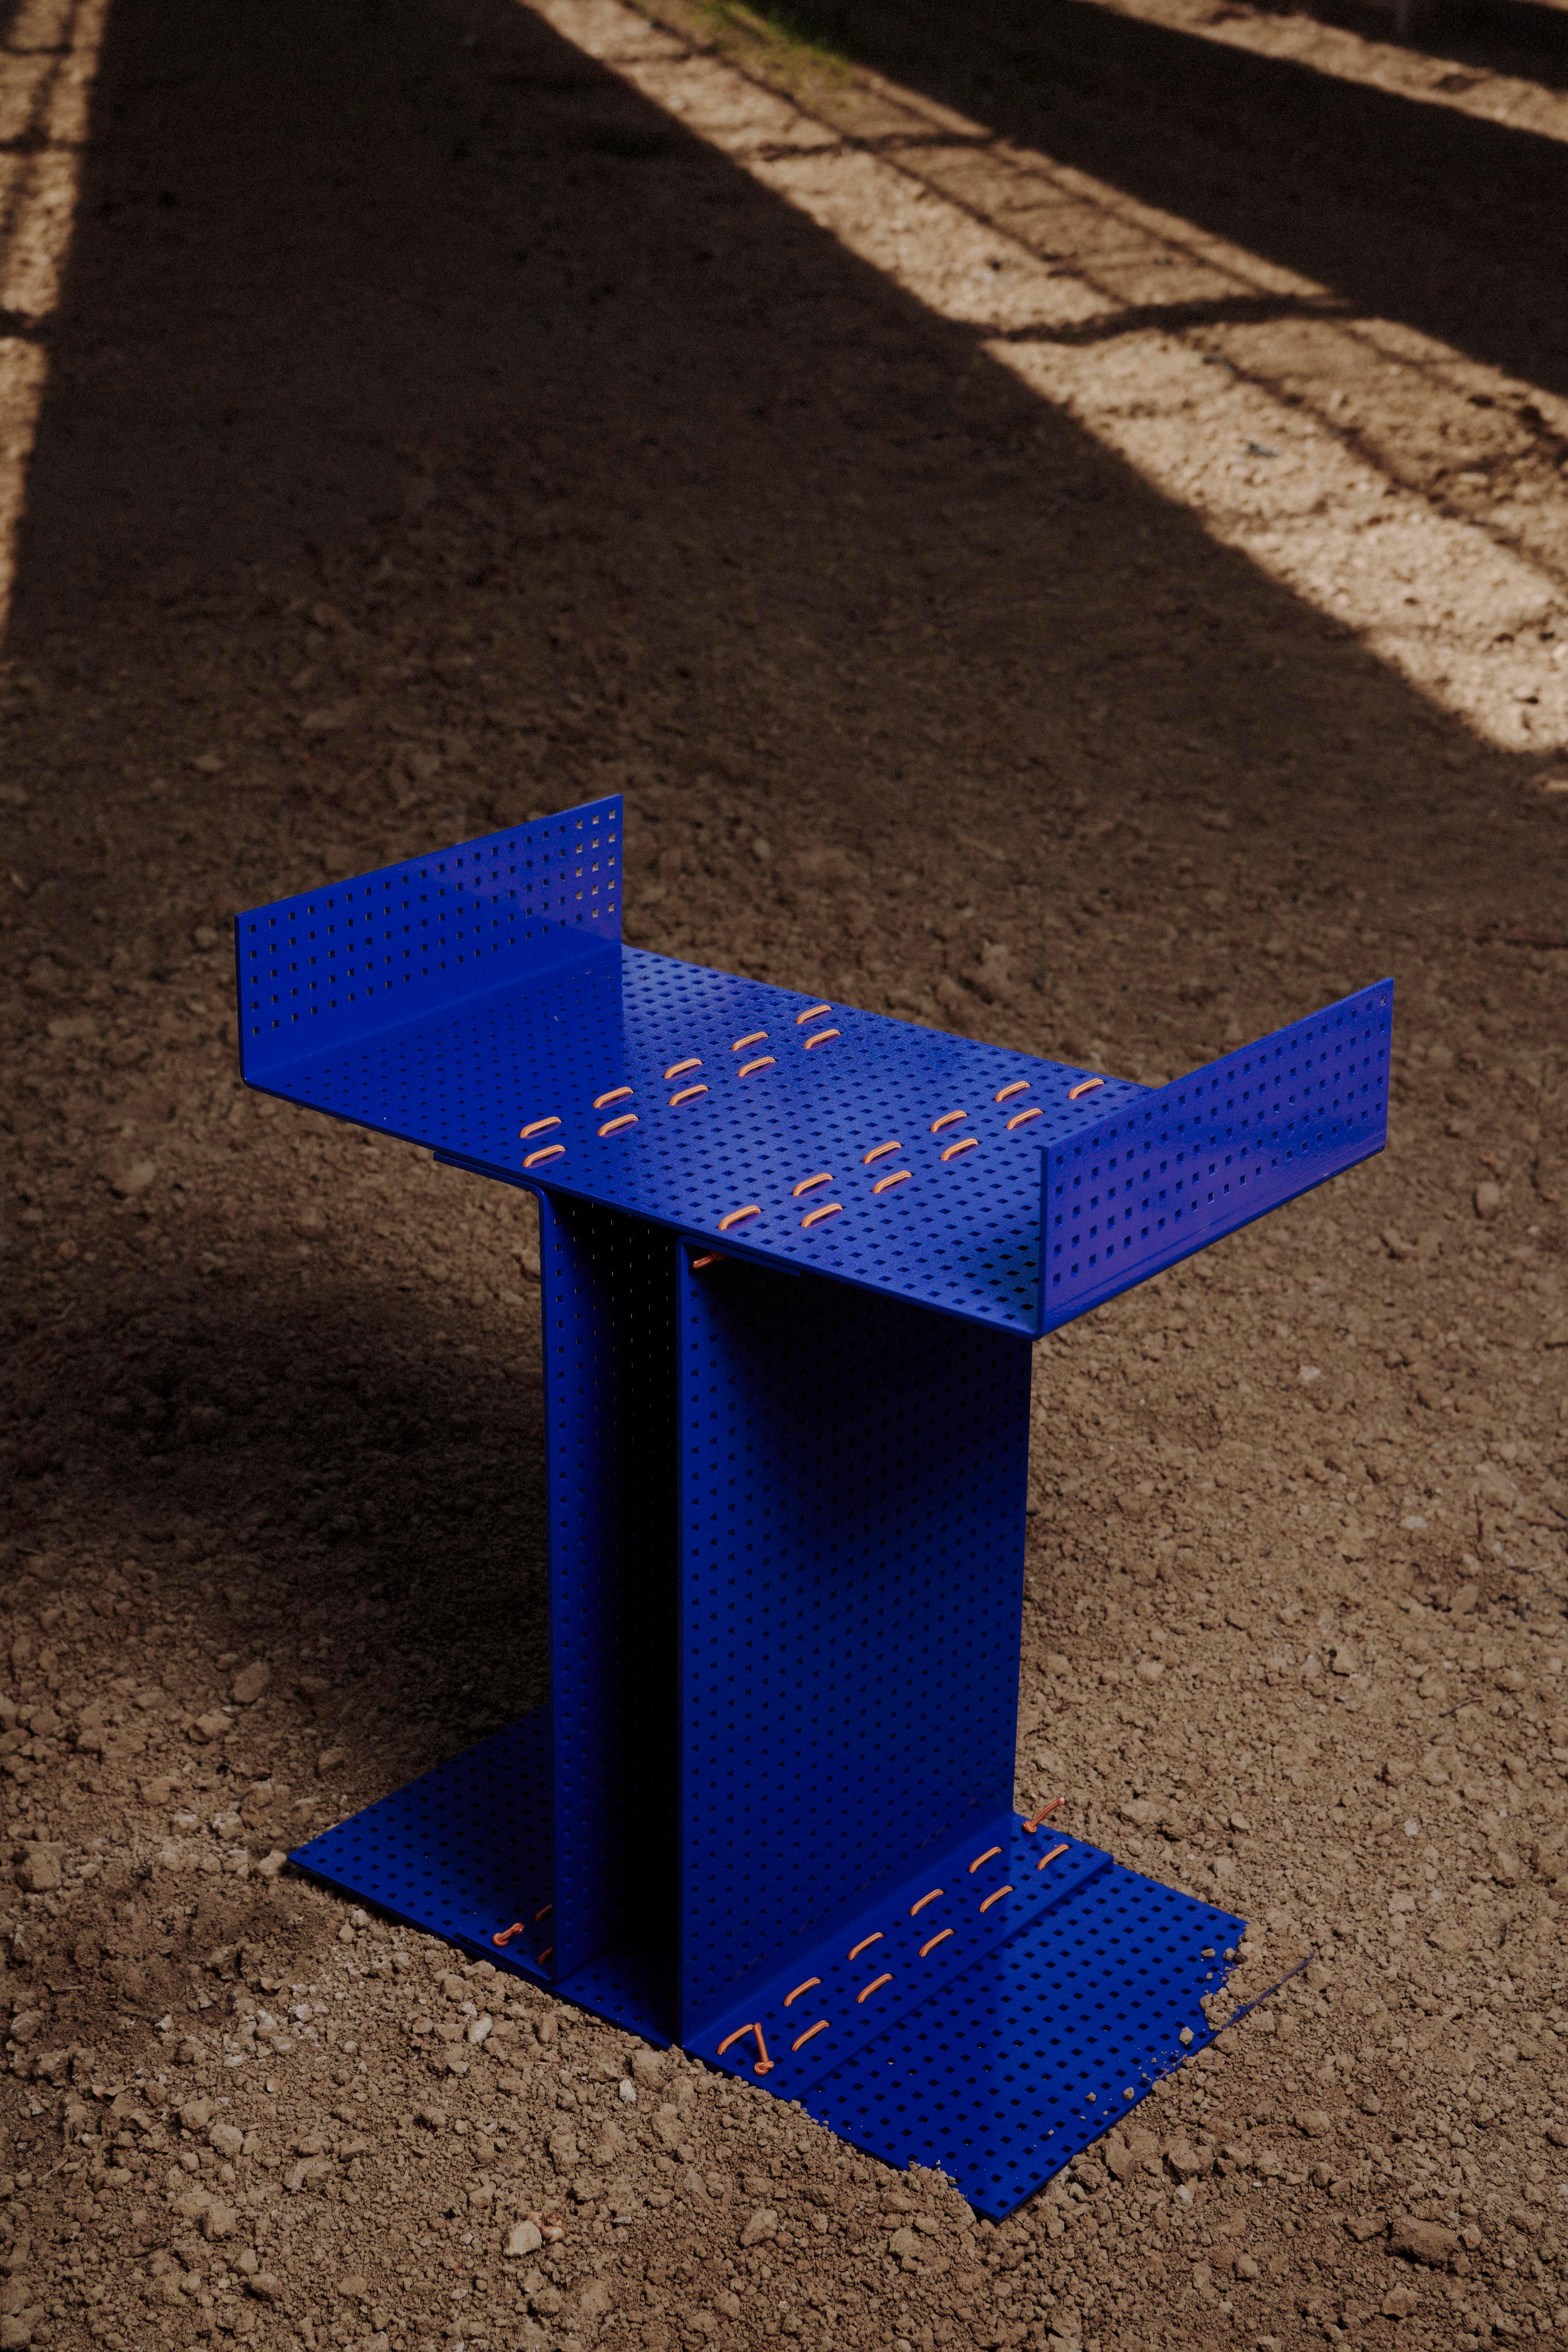 Iron blu coffee table
a piece of furniture that is defined by its user. Lina tries to find the essence of itself. A monolith made up of 4 slabs sewn together becomes a seat or a small table or they can be stacked and create a modular freestanding